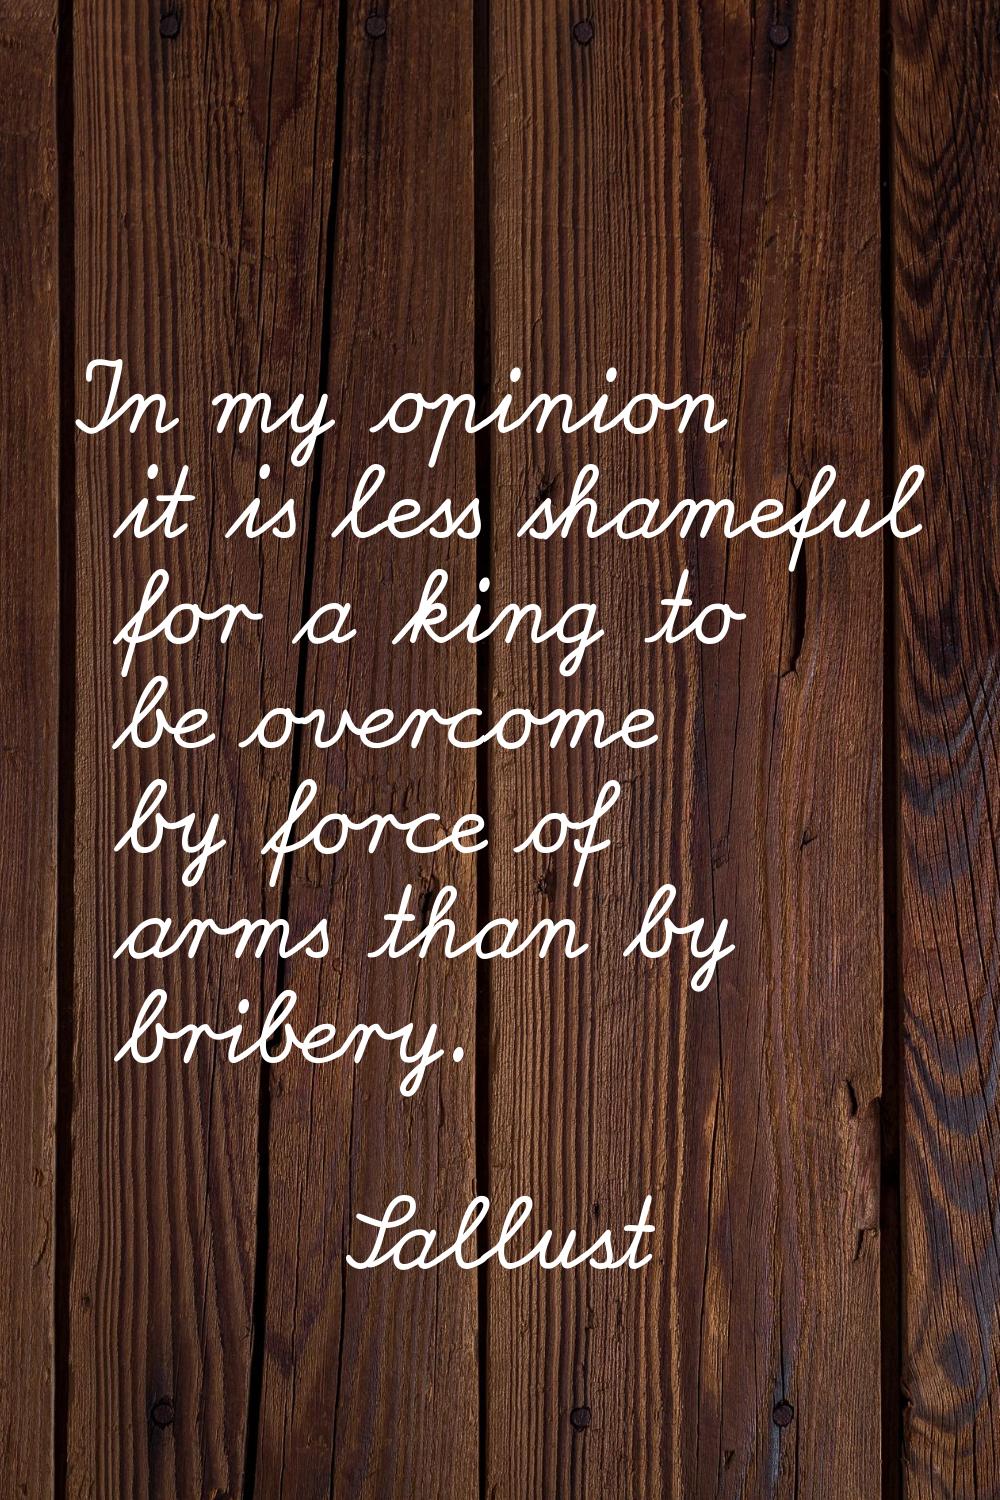 In my opinion it is less shameful for a king to be overcome by force of arms than by bribery.